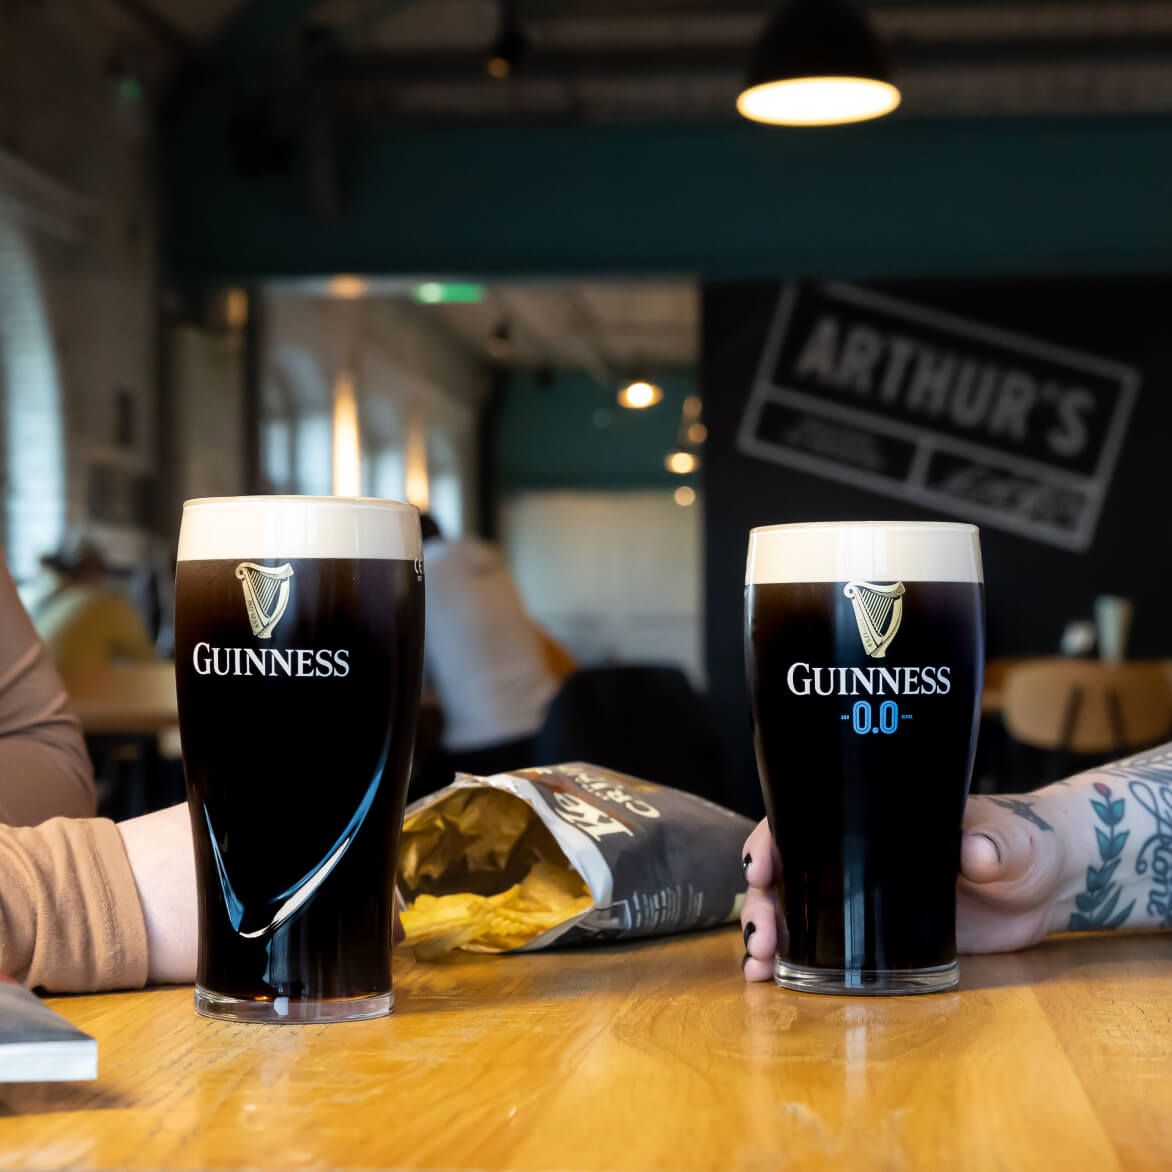 Two people talking over a Guinness draught and a Guinness 0.0 with Keogh’s crinkle cut crips on the table. Arthur’s Bar sign visible in the background.